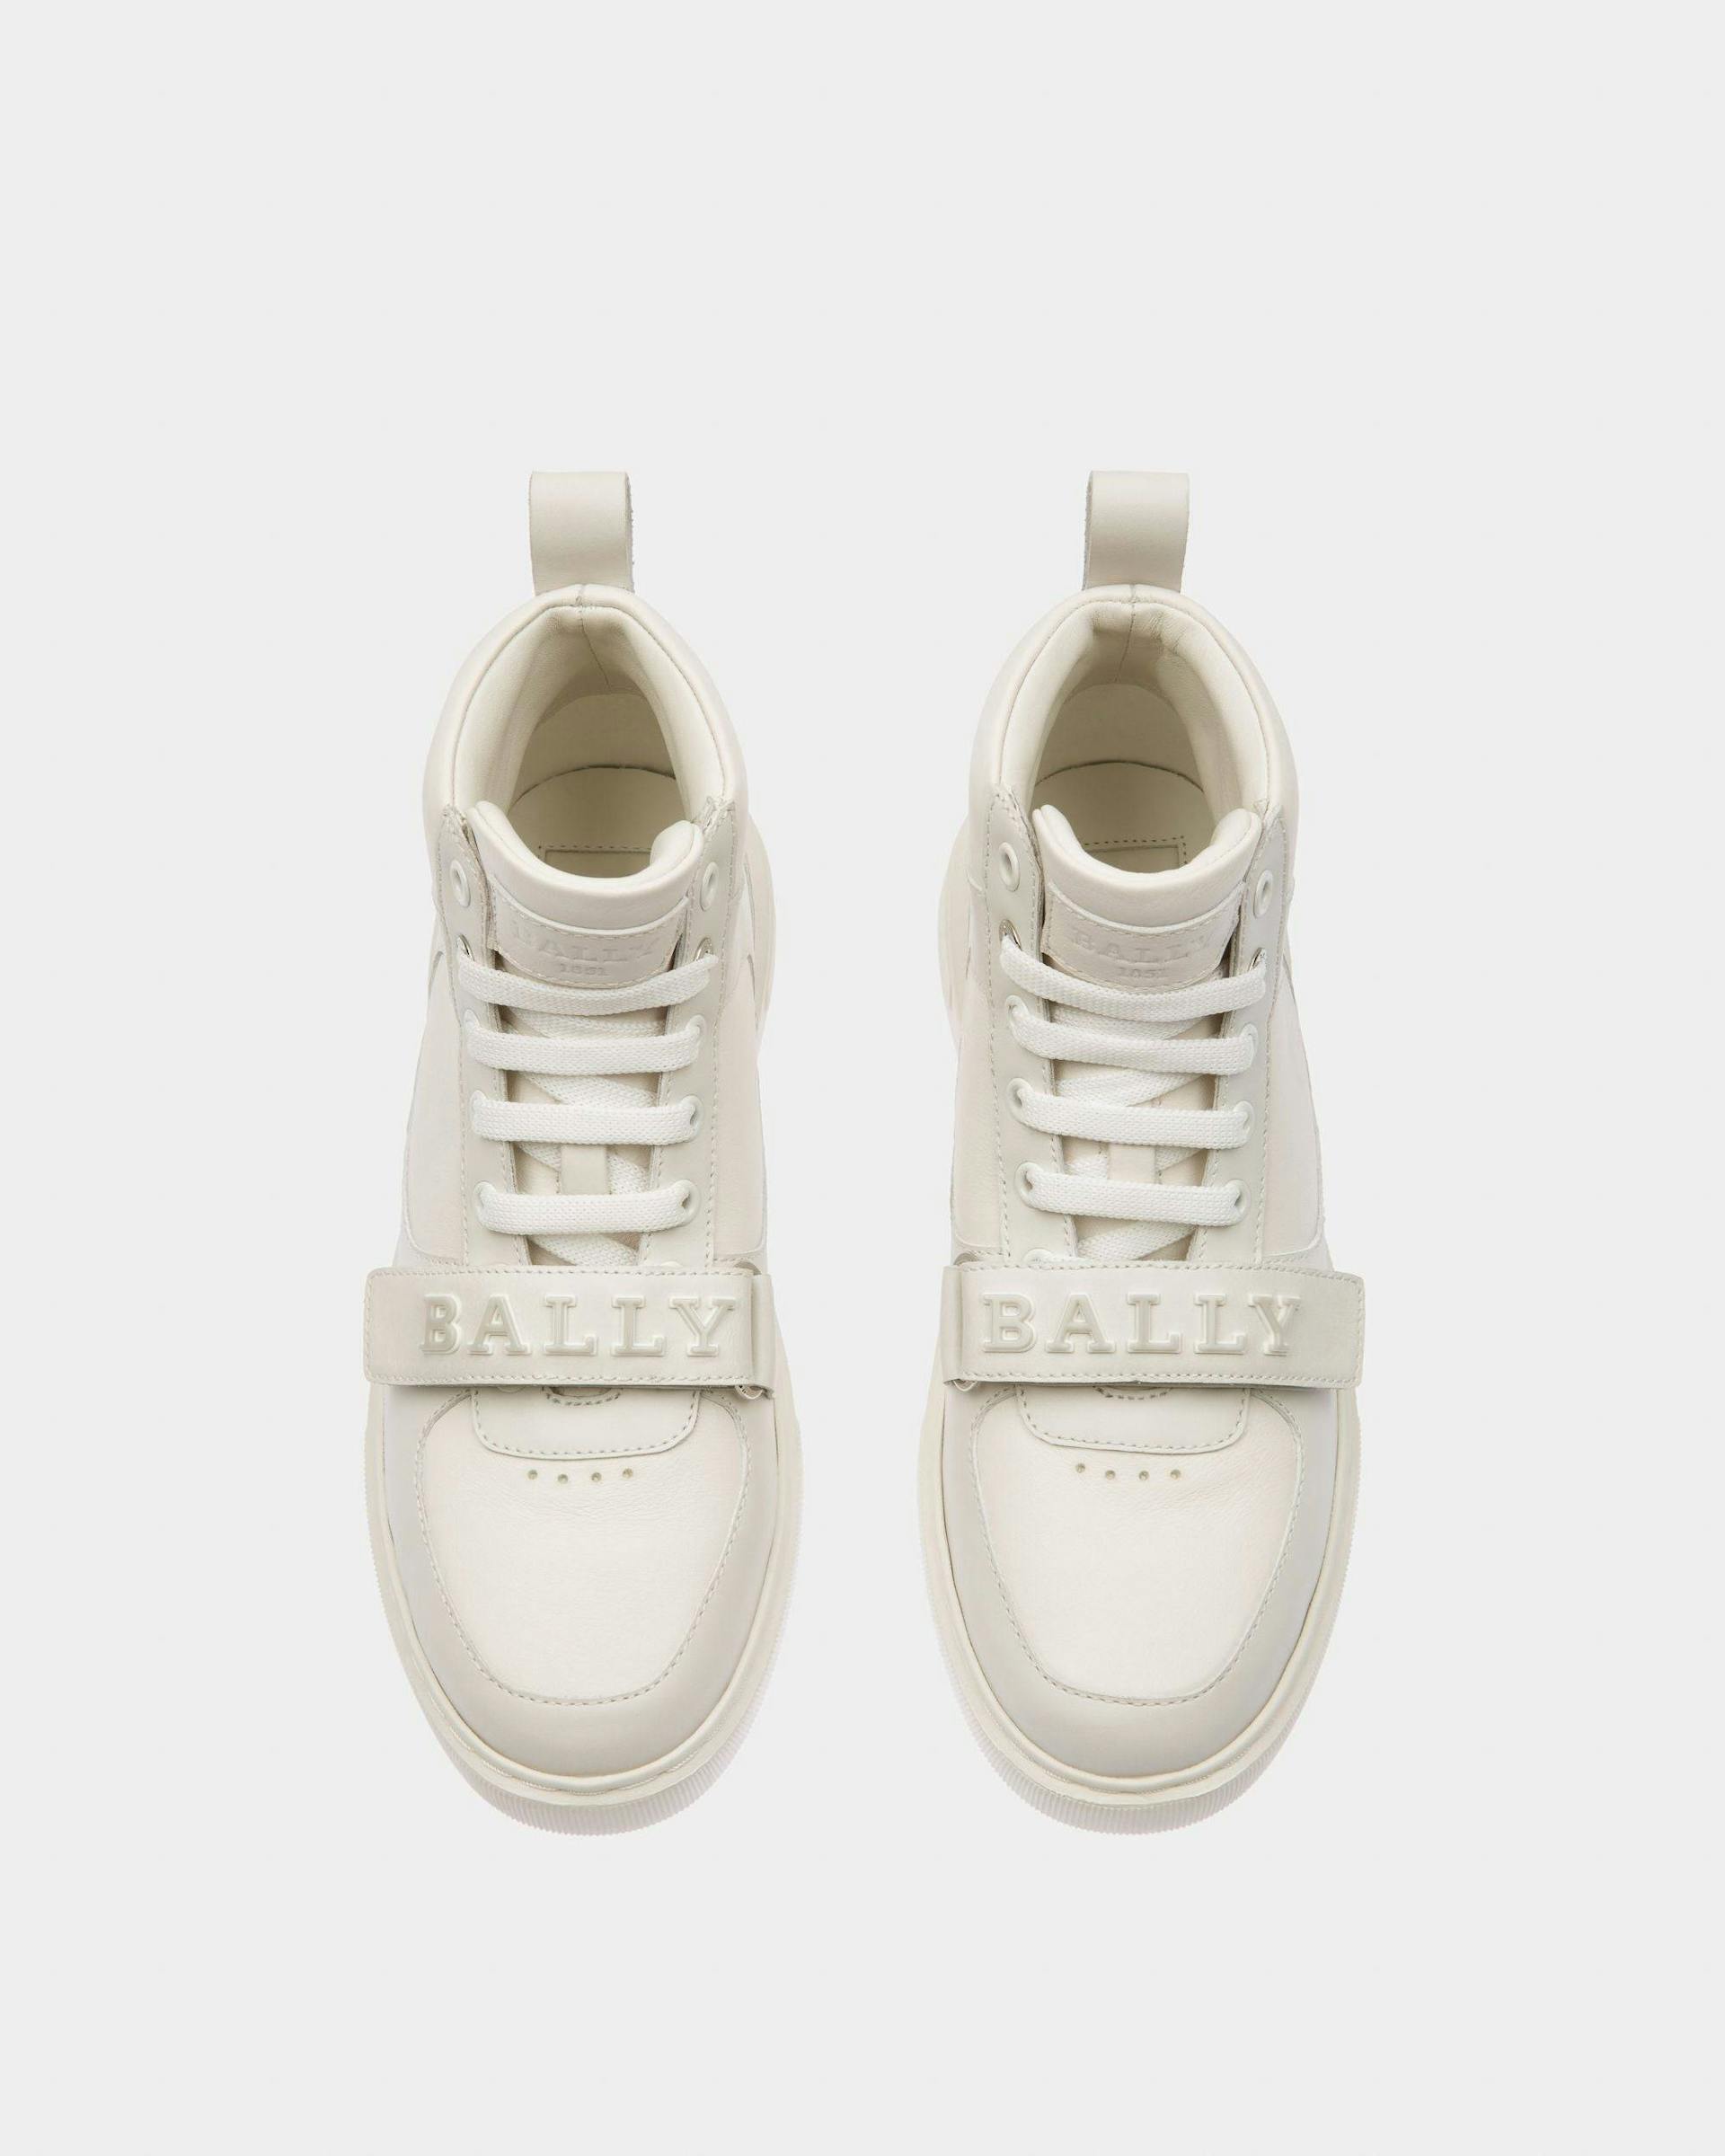 Merryk Leather Sneakers In White - Women's - Bally - 02